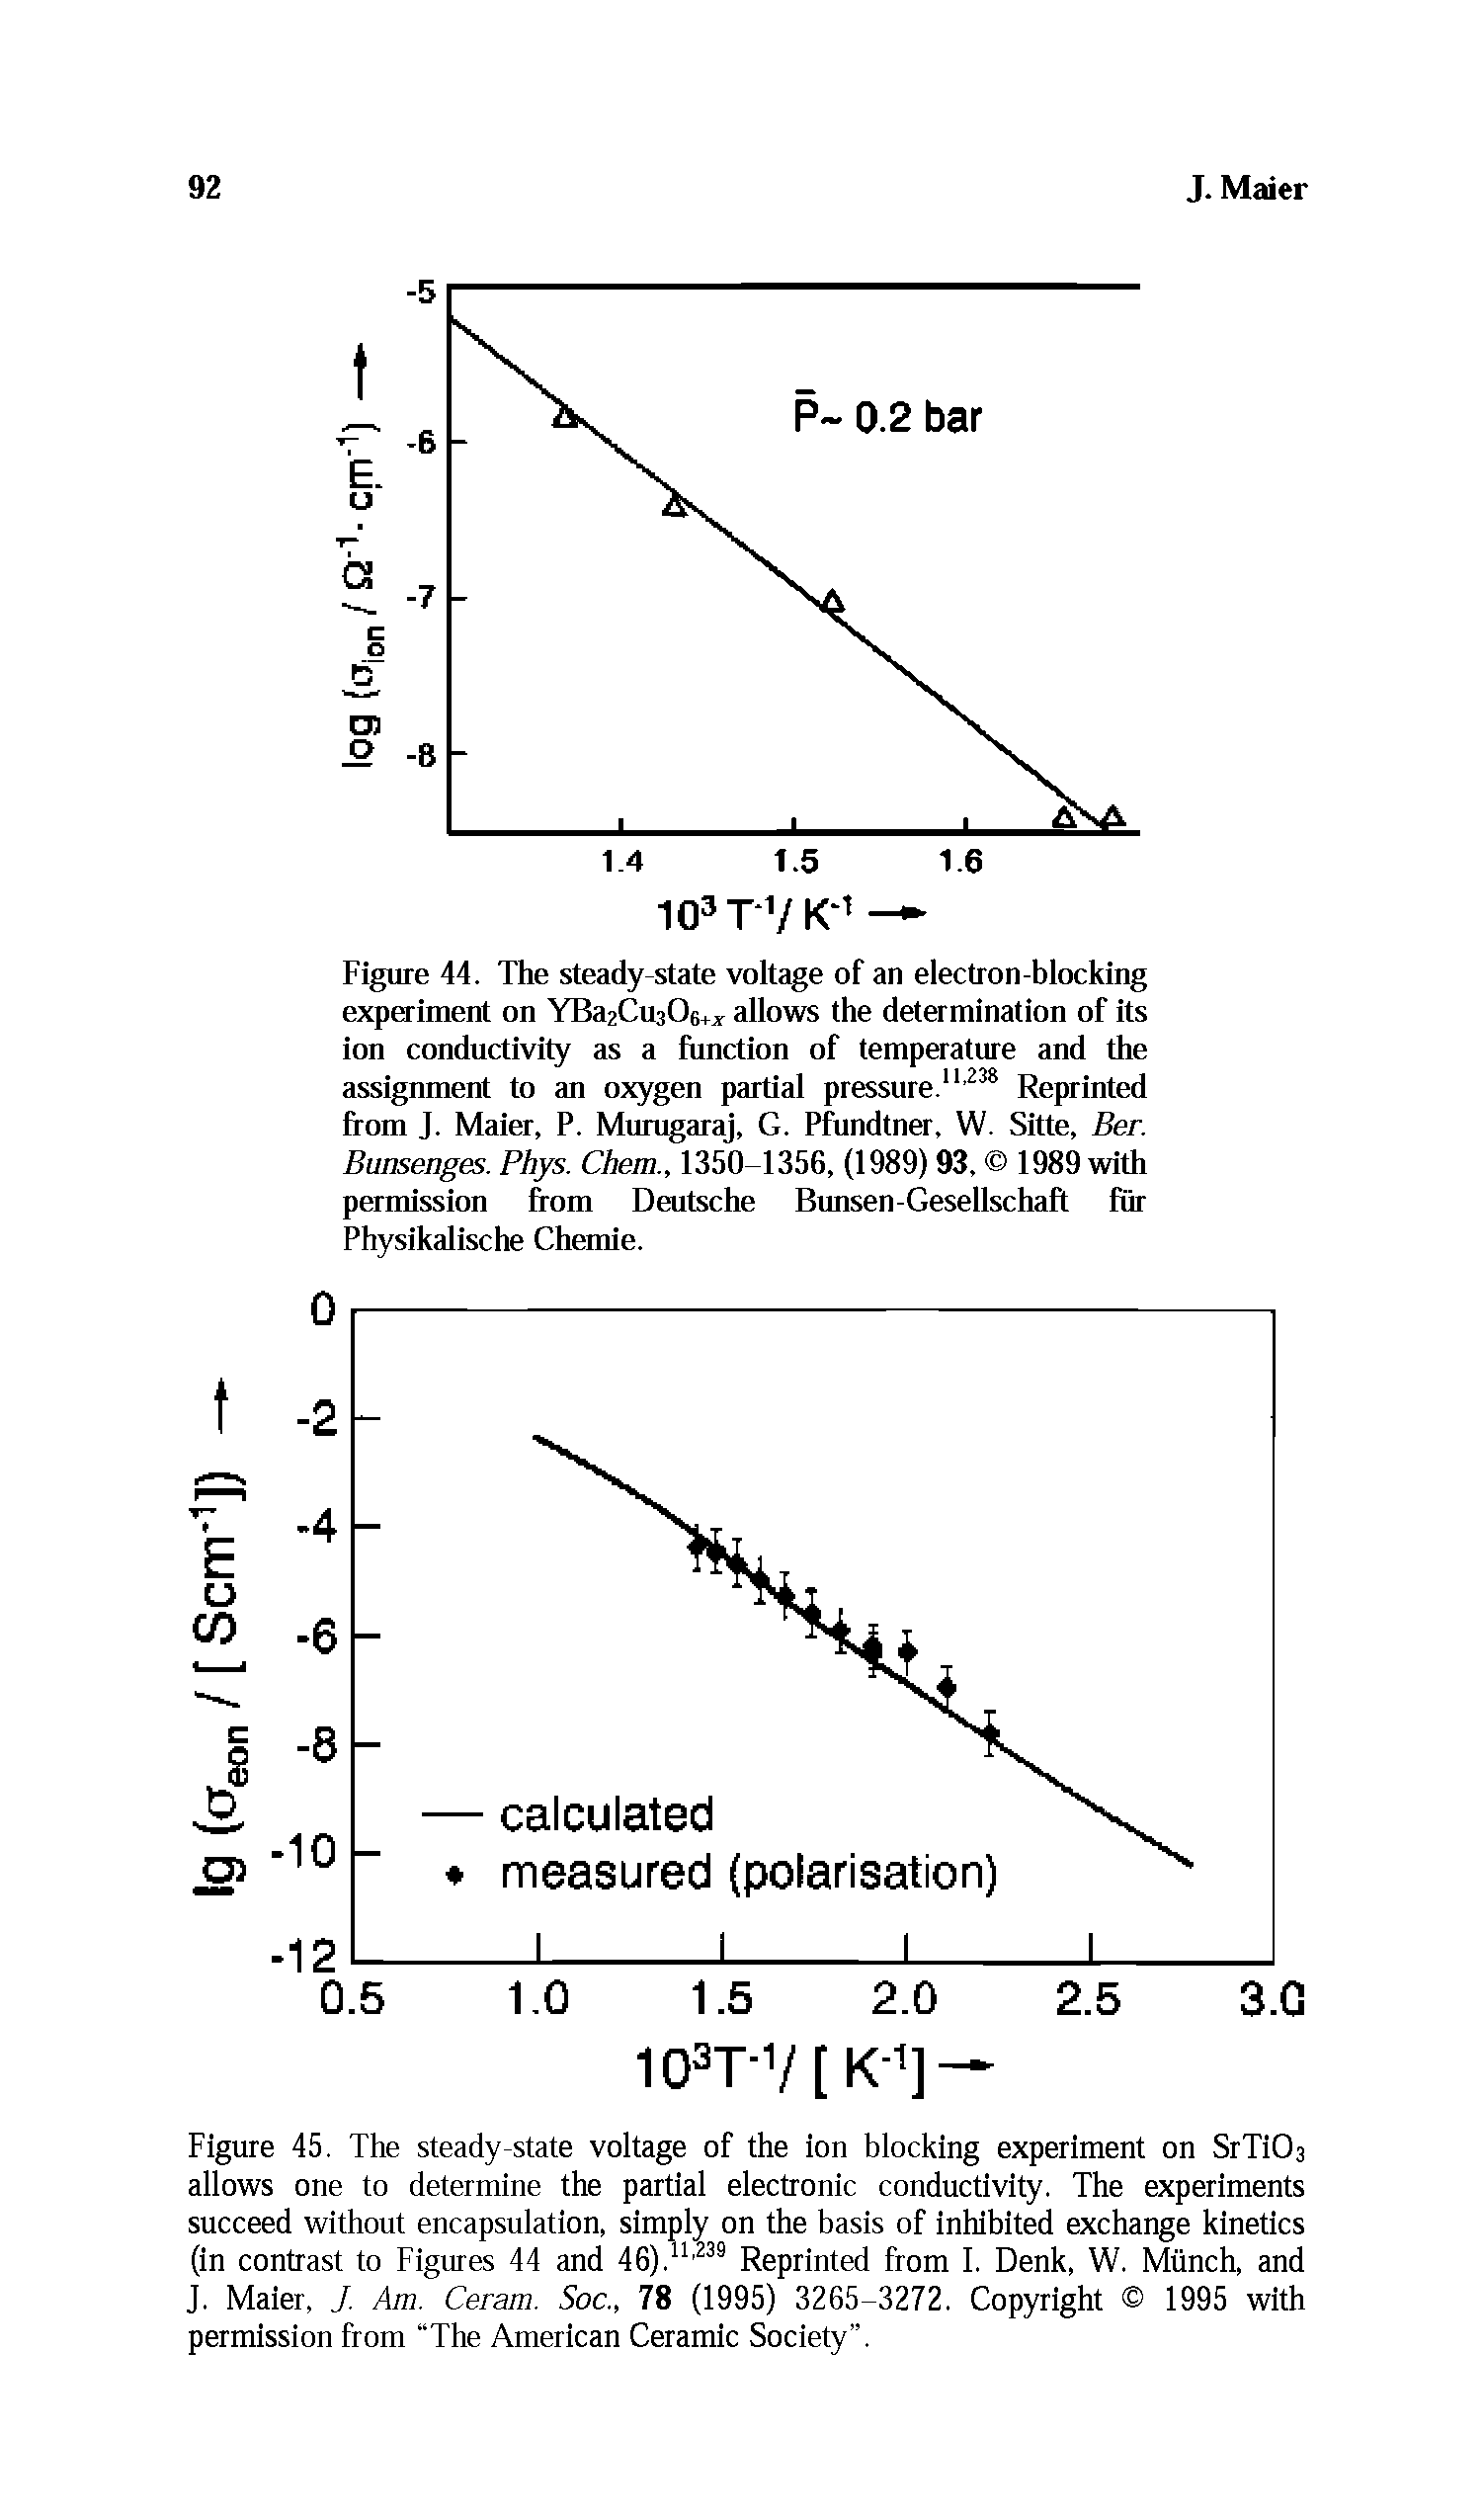 Figure 45. The steady-state voltage of the ion blocking experiment on SrTi03 allows one to determine the partial electronic conductivity. The experiments succeed without encapsulation, simply on the basis of inhibited exchange kinetics (in contrast to Figures 44 and 46).11,239 Reprinted from I. Denk, W. Munch, and J. Maier, J. Am. Ceram. Soc., 78 (1995) 3265-3272. Copyright 1995 with permission from The American Ceramic Society .